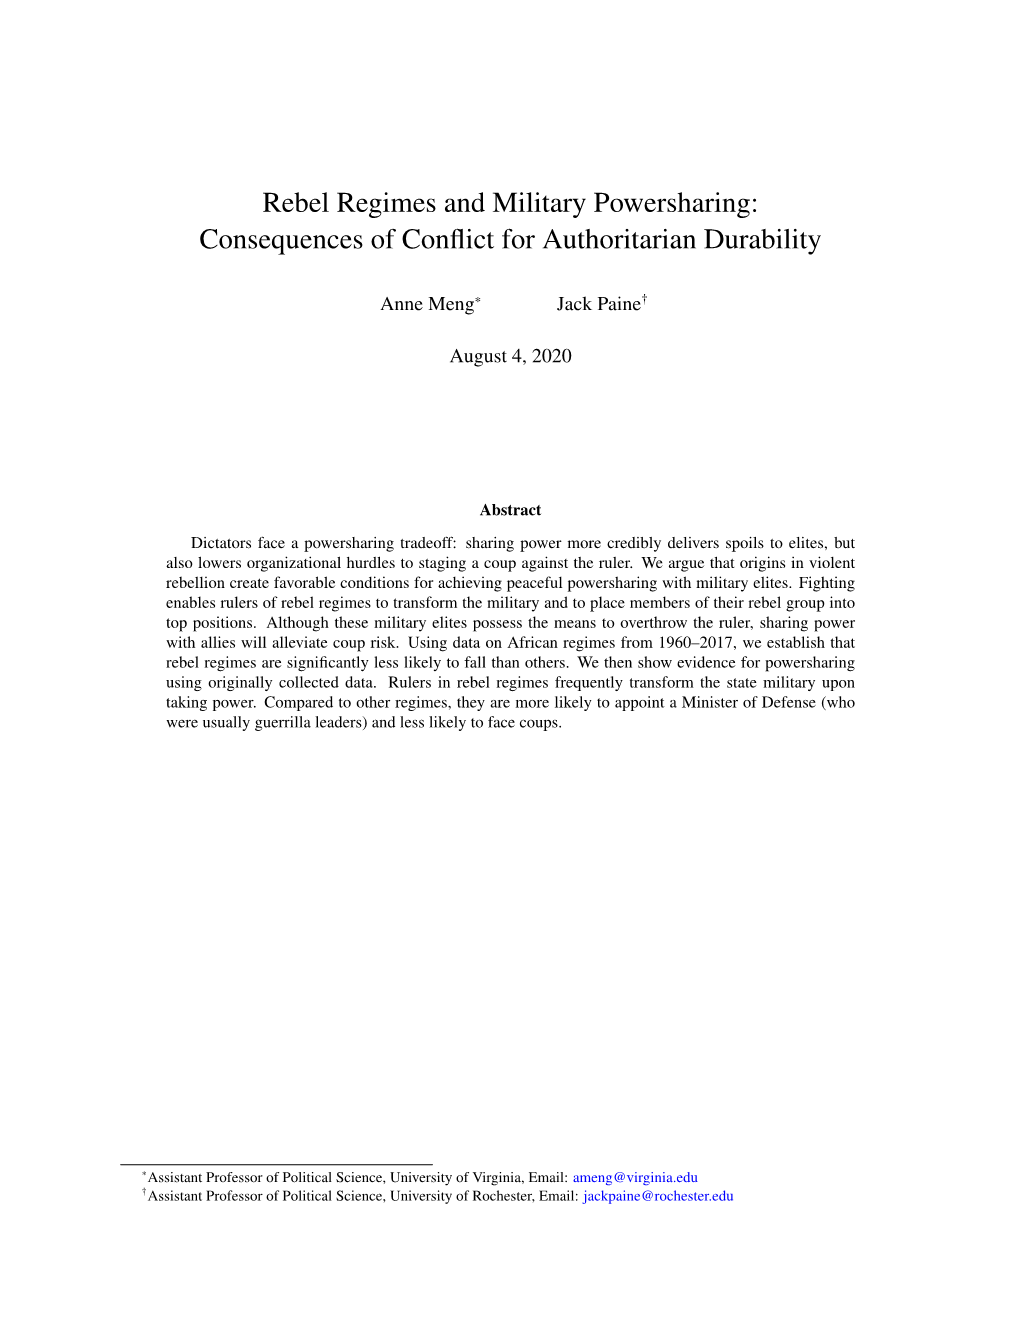 Rebel Regimes and Military Powersharing: Consequences of Conﬂict for Authoritarian Durability